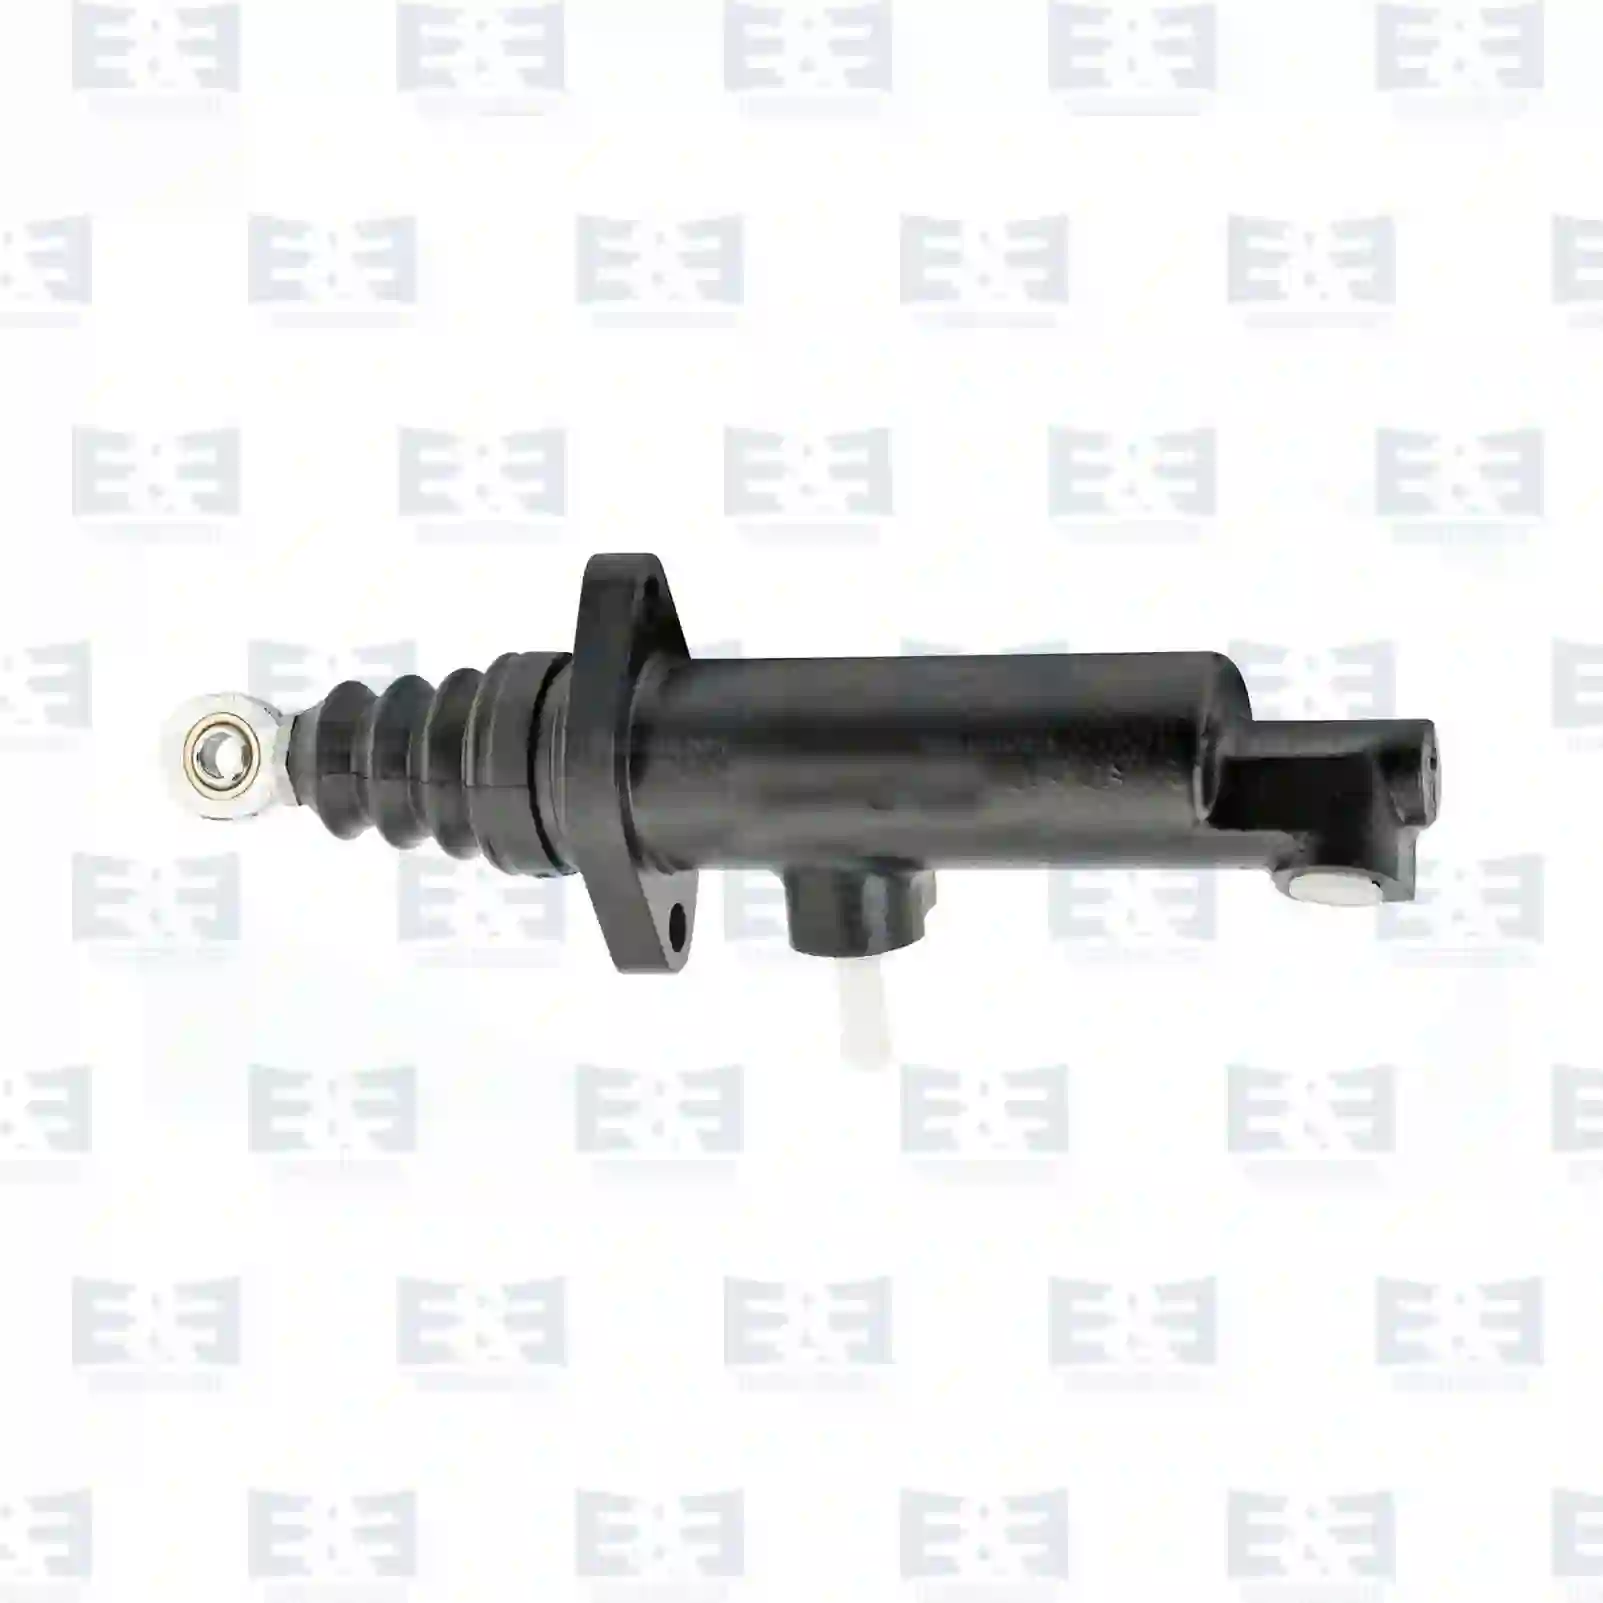 Clutch Cylinder Clutch cylinder, EE No 2E2288056 ,  oem no:0094660, 0894880, 223443, 372589, 894880, 94660 E&E Truck Spare Parts | Truck Spare Parts, Auotomotive Spare Parts